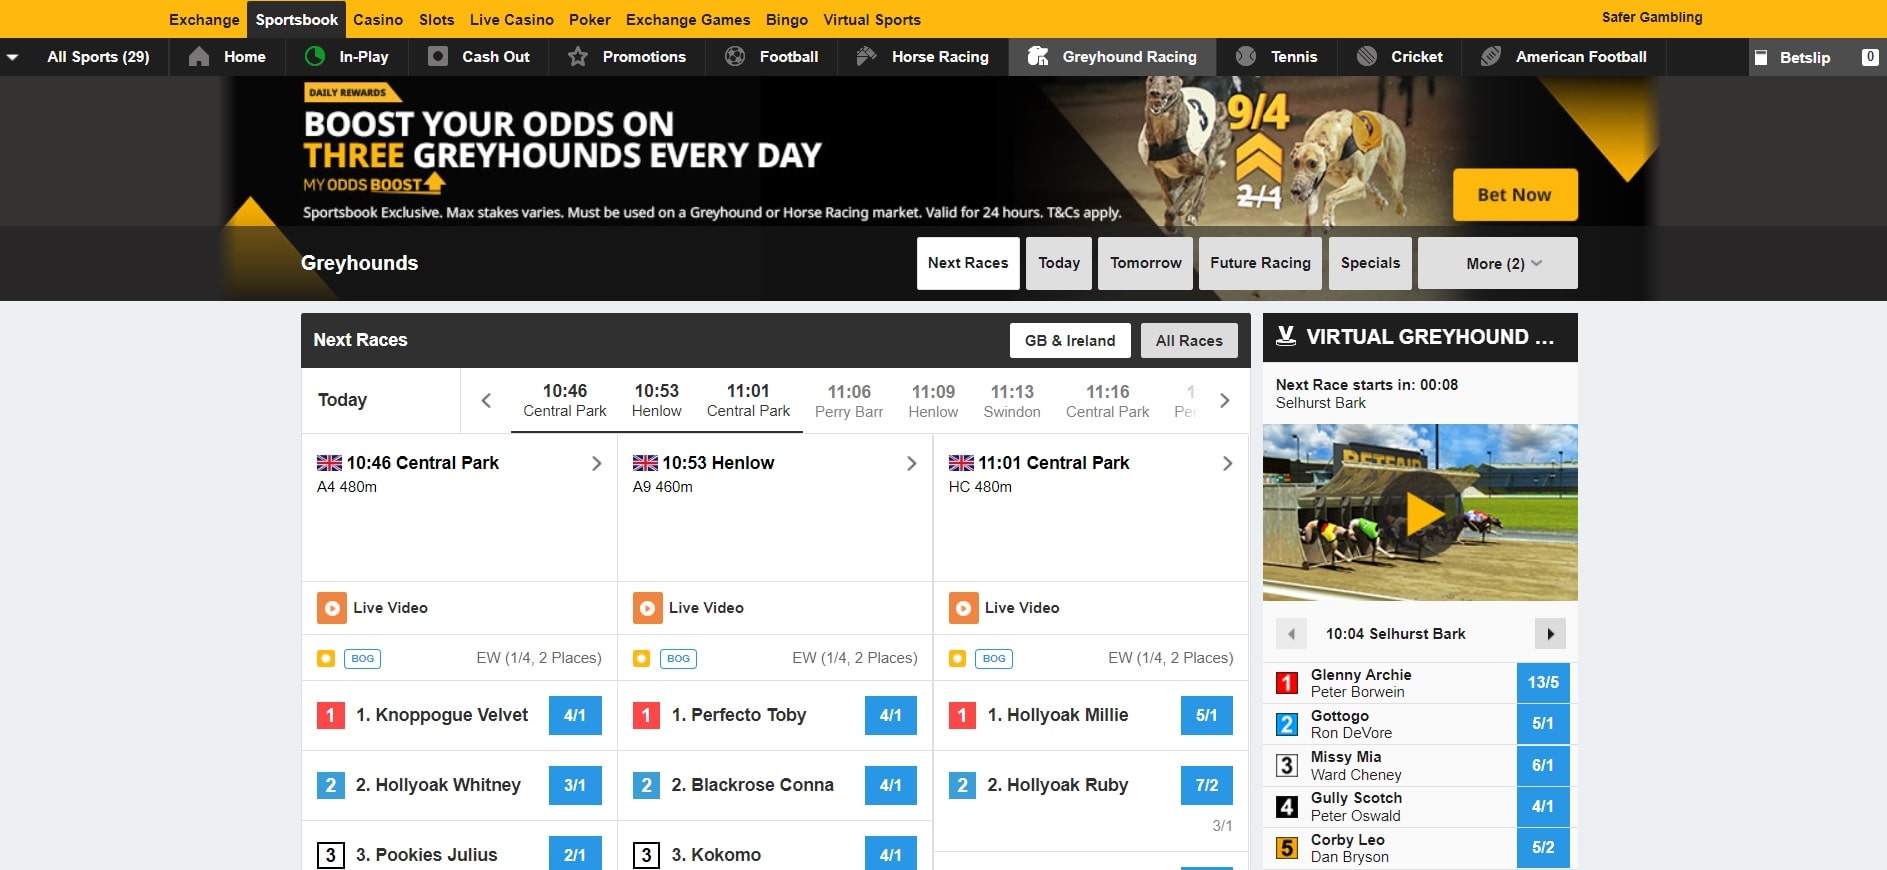 East anglian greyhound derby betting app uk betting odds us president